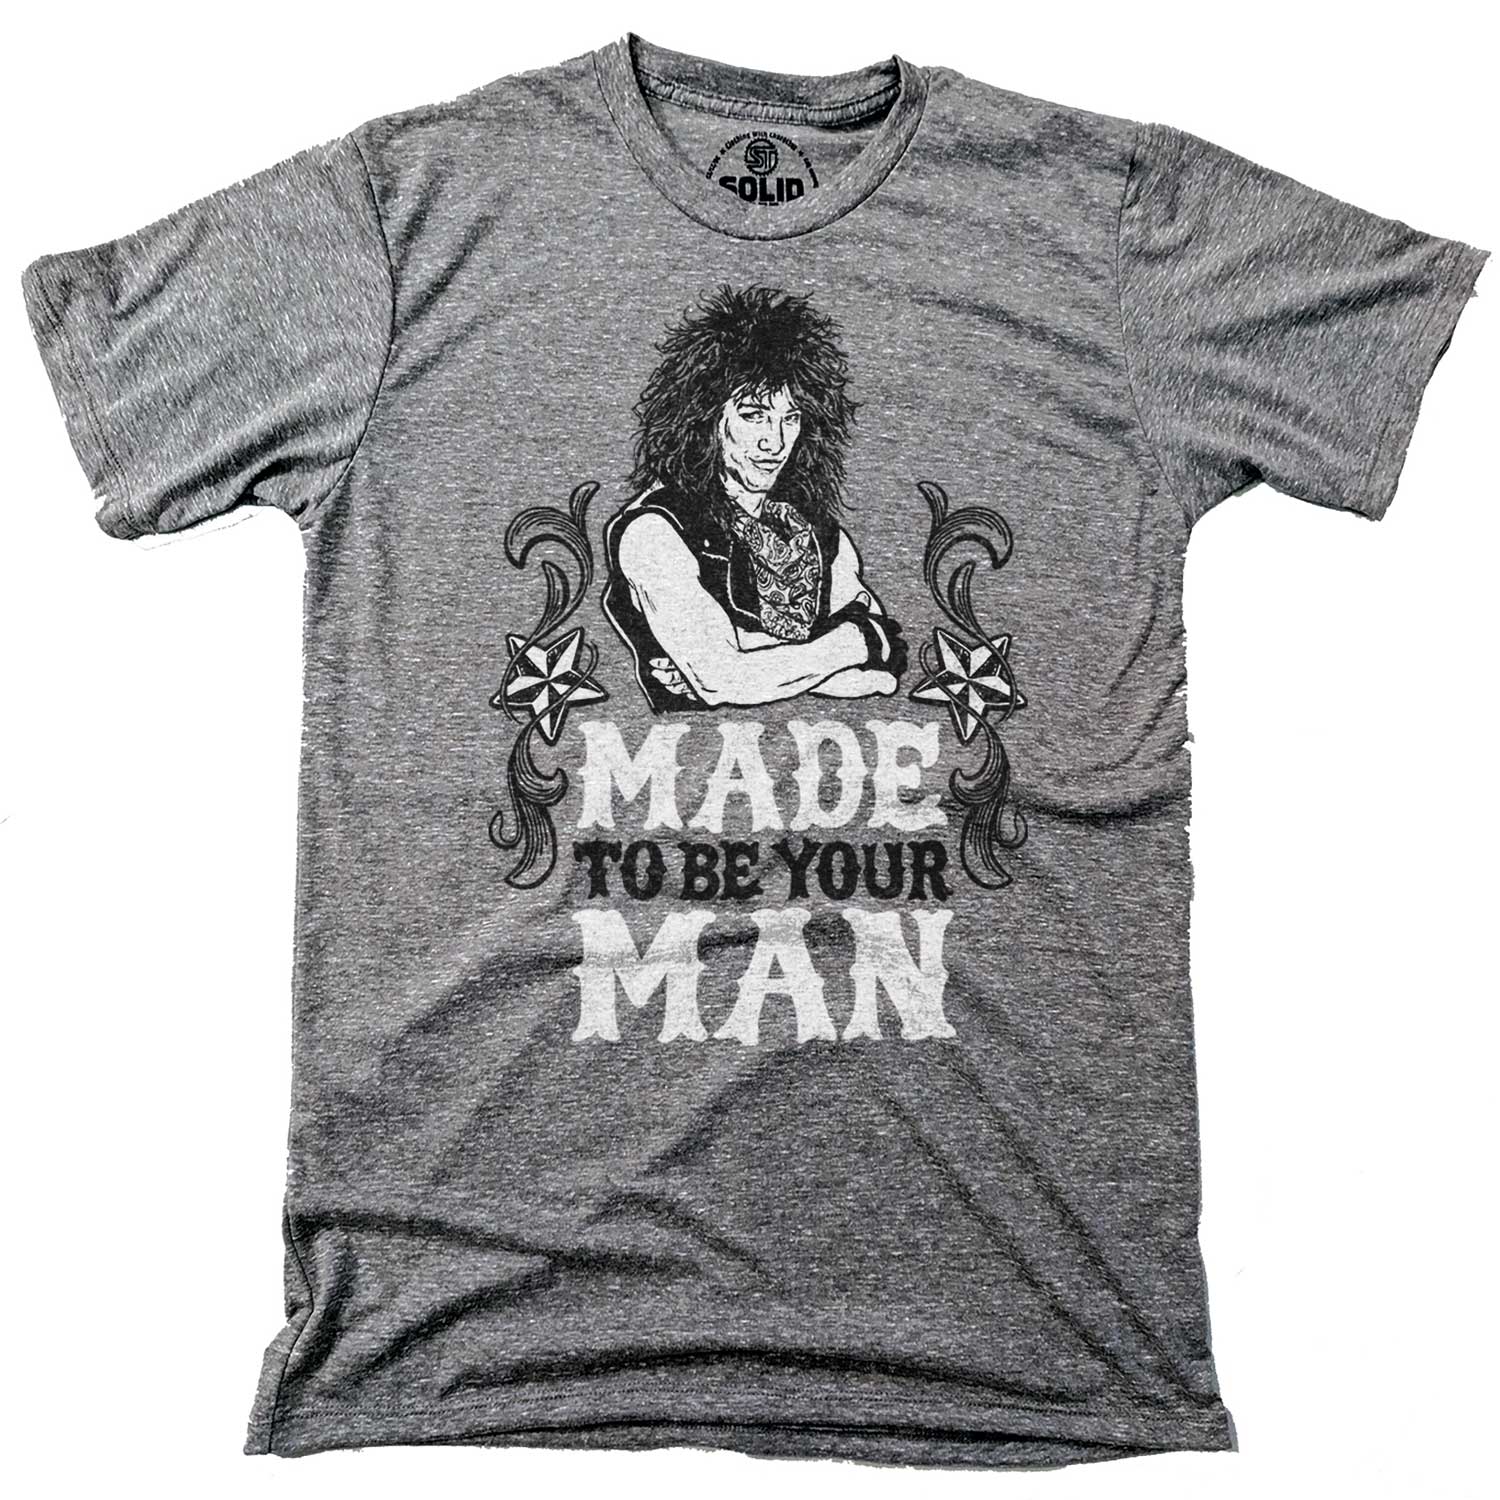 Men's Made To Be Your Man Vintage Graphic Tee | Cool Bon Jovi T-shirt for Men | Solid Threads